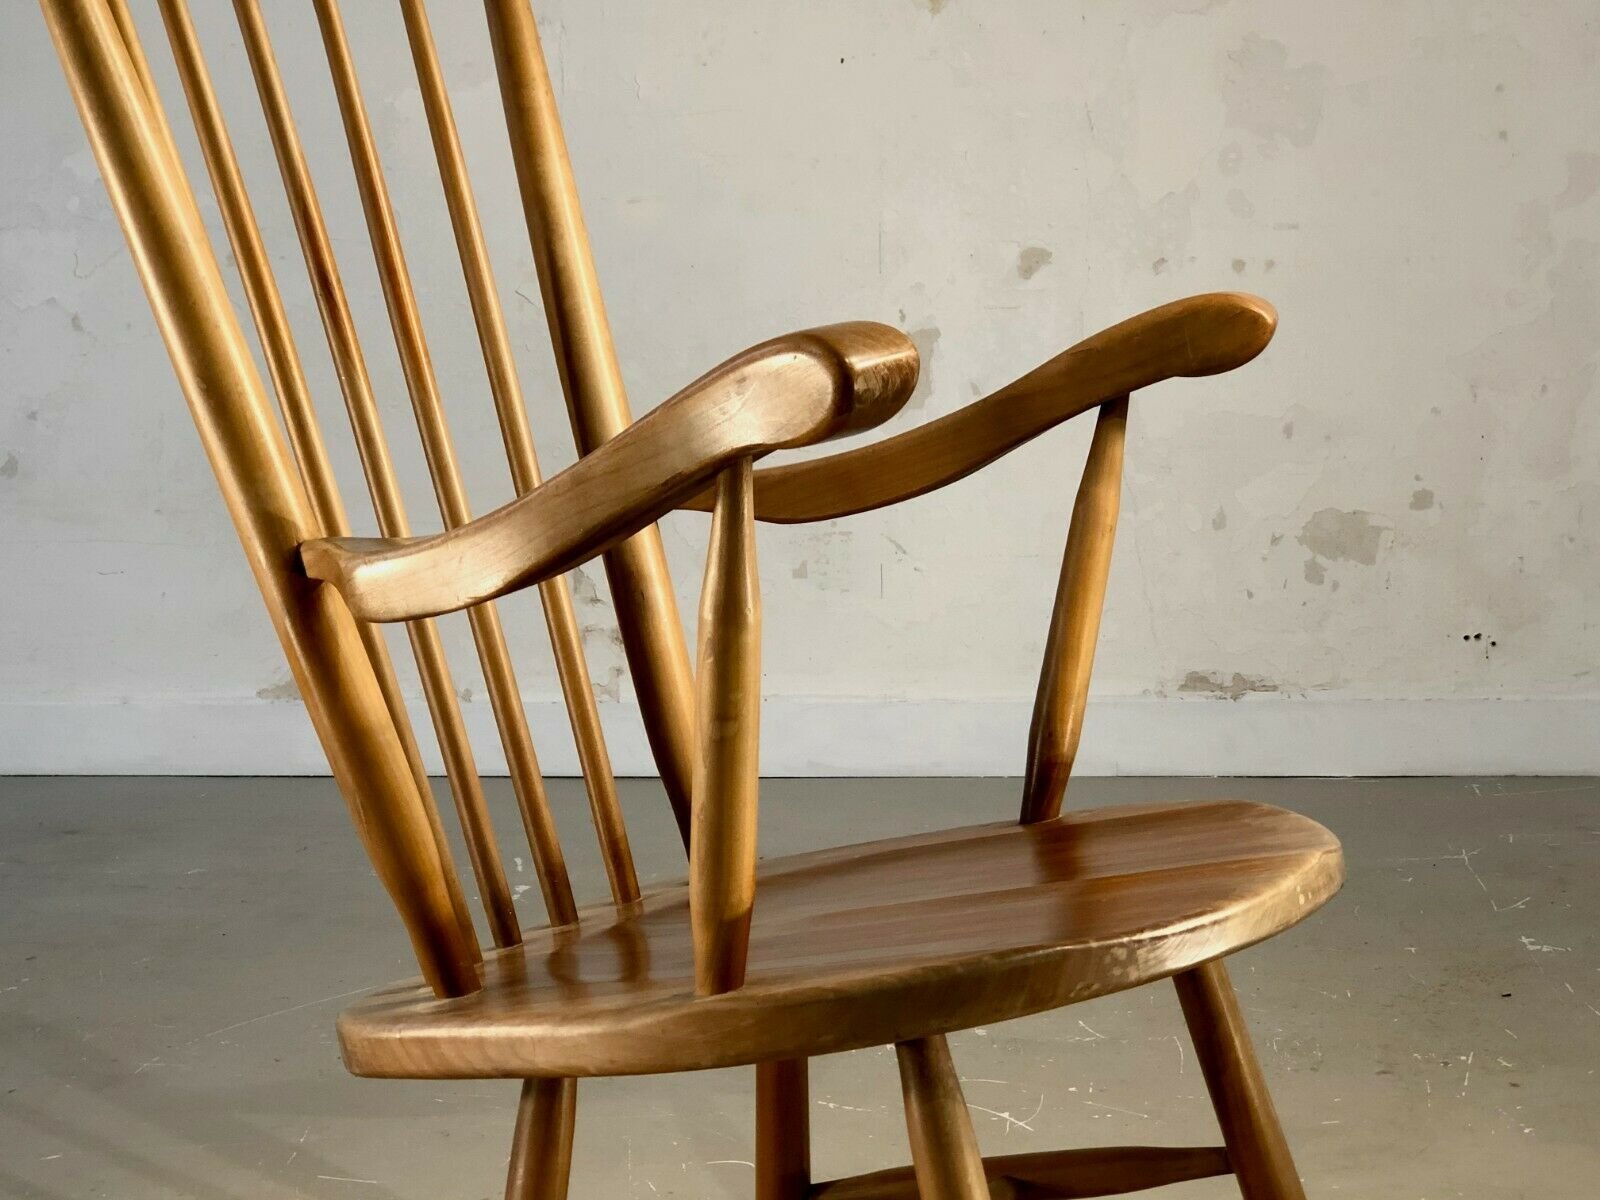 Solid Wood Rocking Chair, 1950s for sale at Pamono